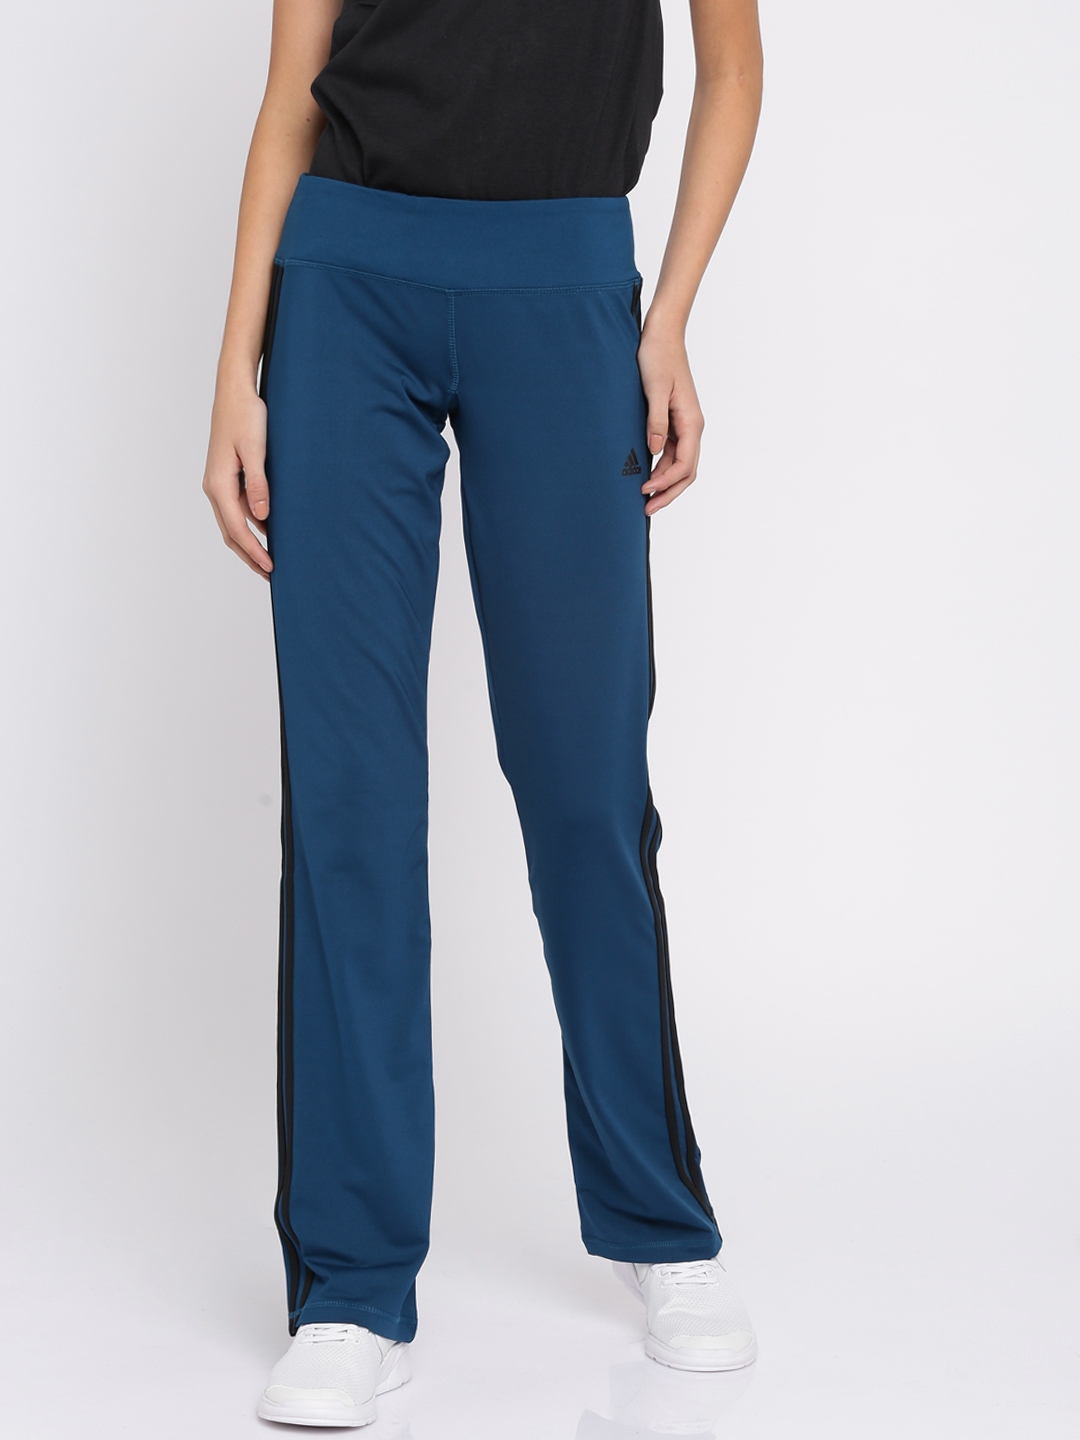 Buy ADIDAS Teal Blue BASIC 3S Track Pants - Track Pants for Women ...